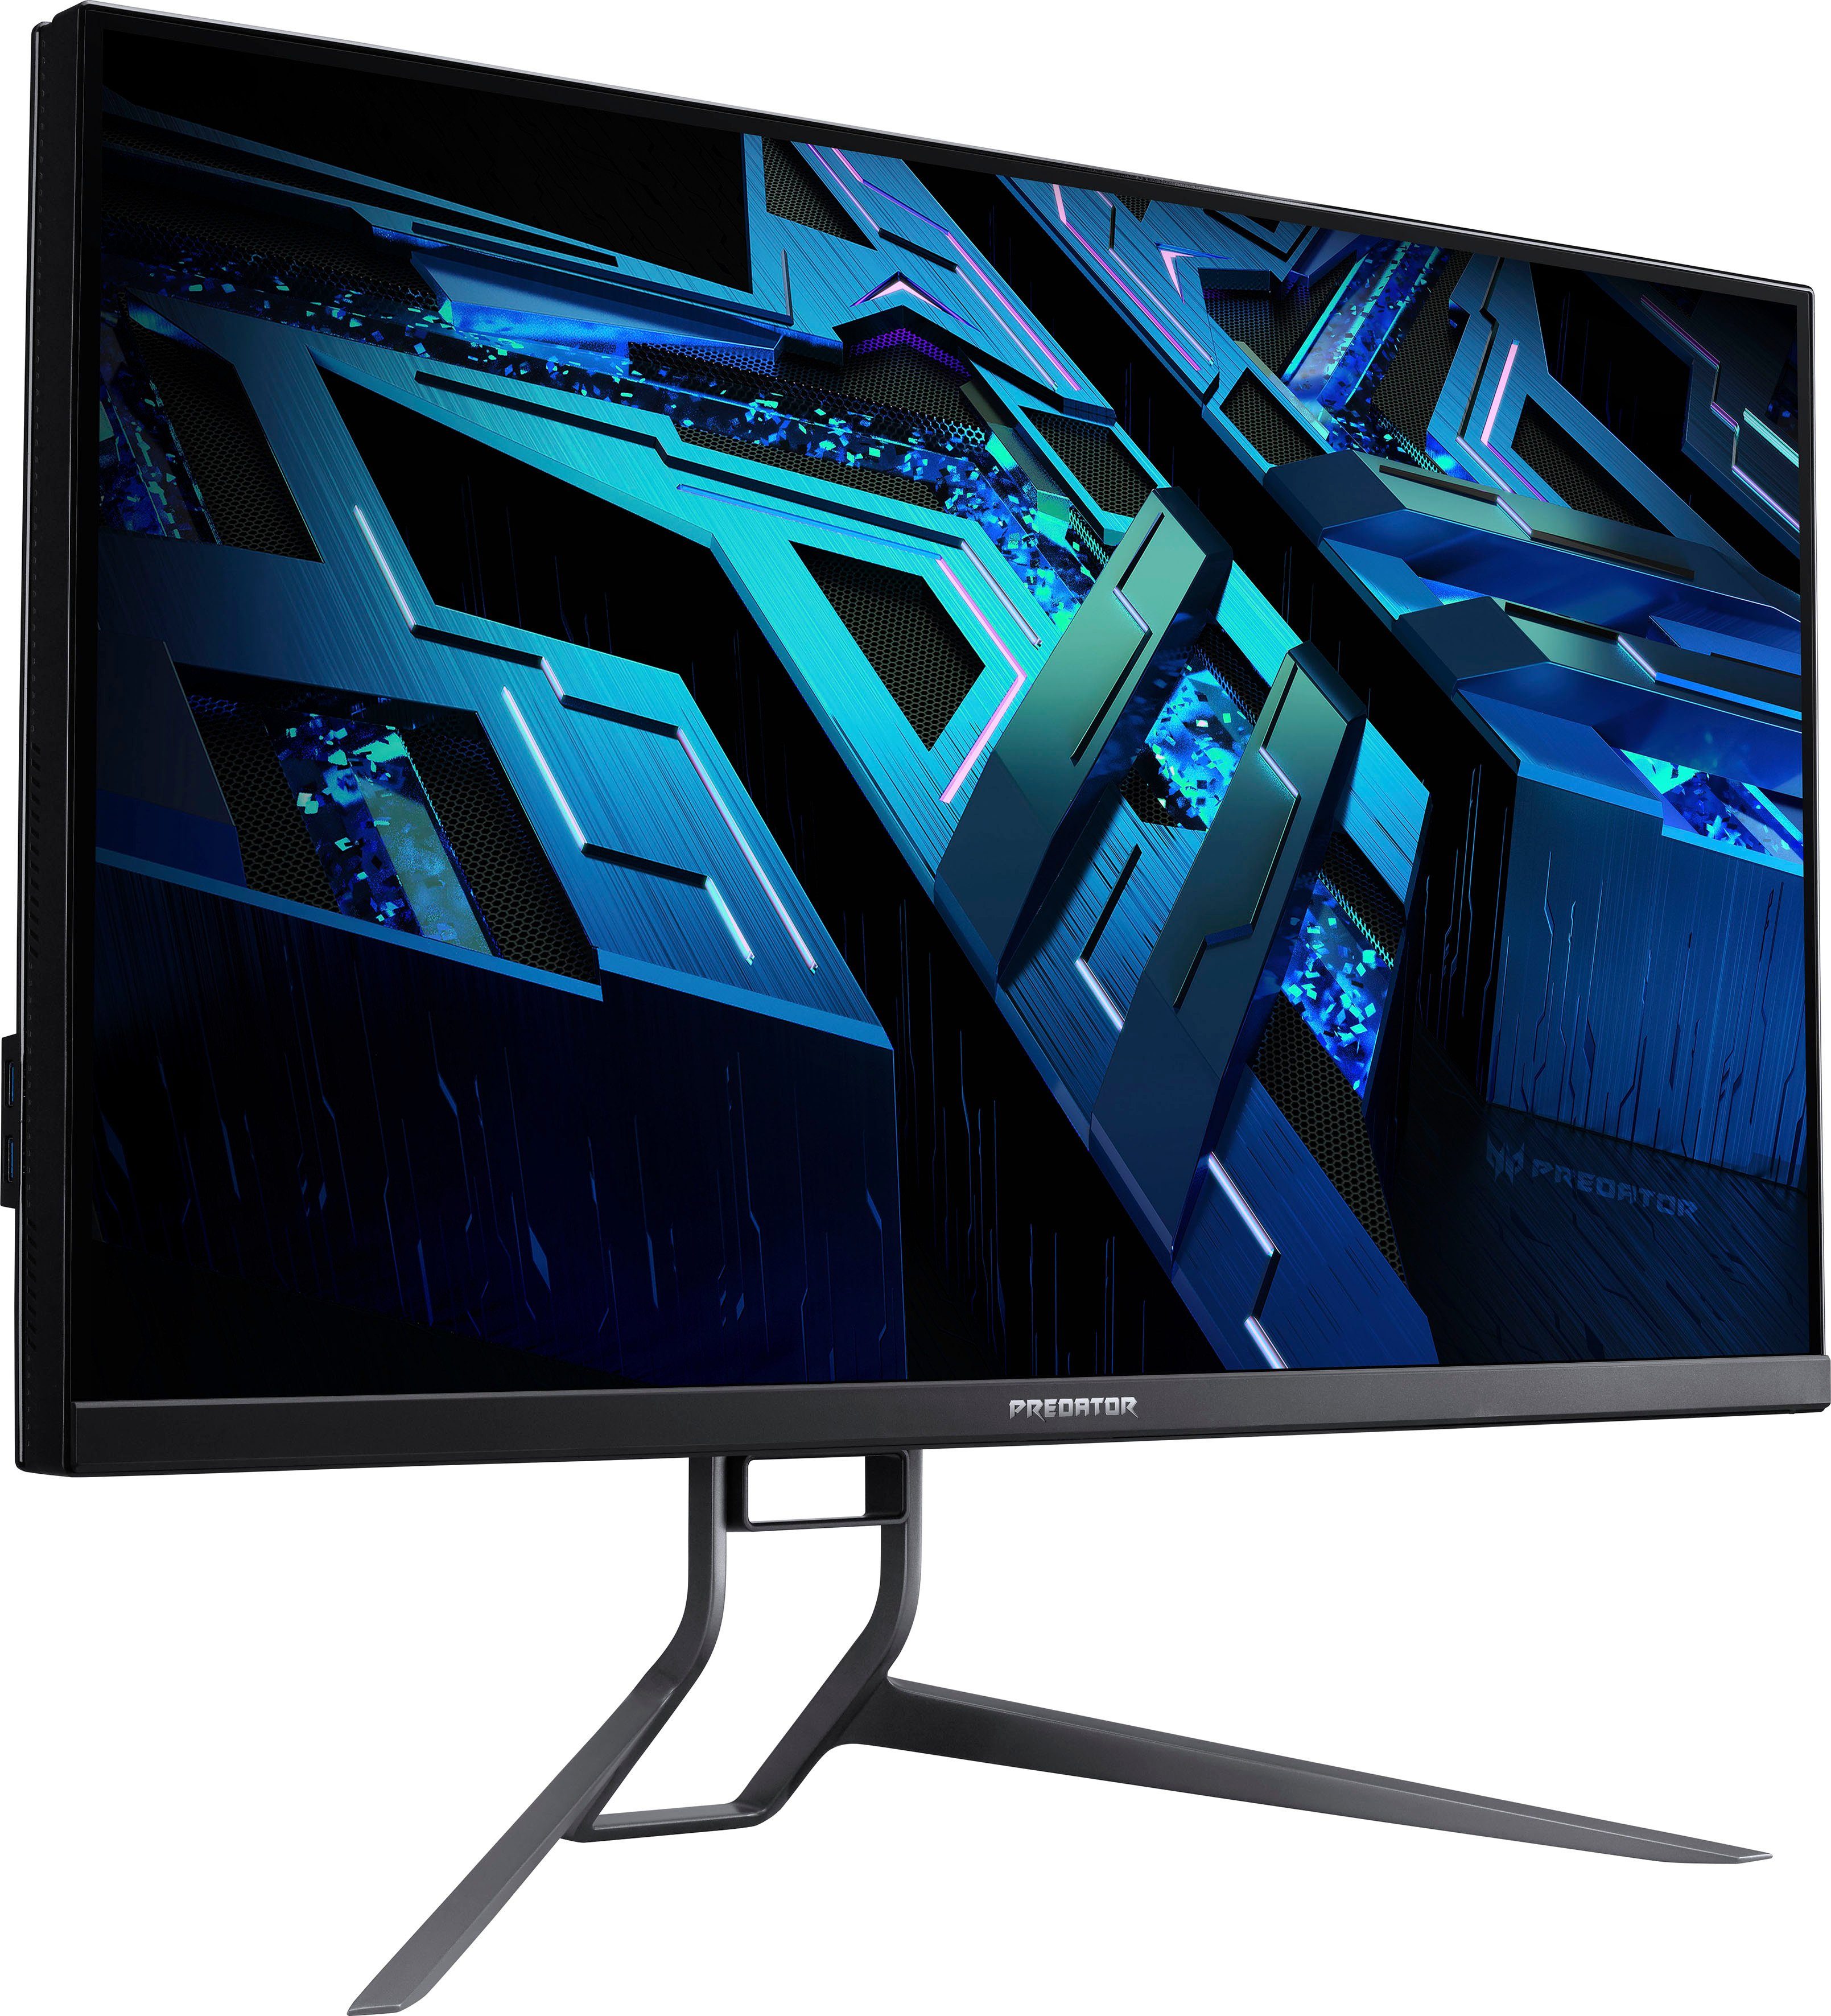 3840 Acer (81 0,7 Panel, Gaming-LED-Monitor Ultra X32 Reaktionszeit, HD, 160 miniLED ms Quantum 1000) FP Dot HDR LCD, ", 4K px, x cm/32 Predator Hz, 2160